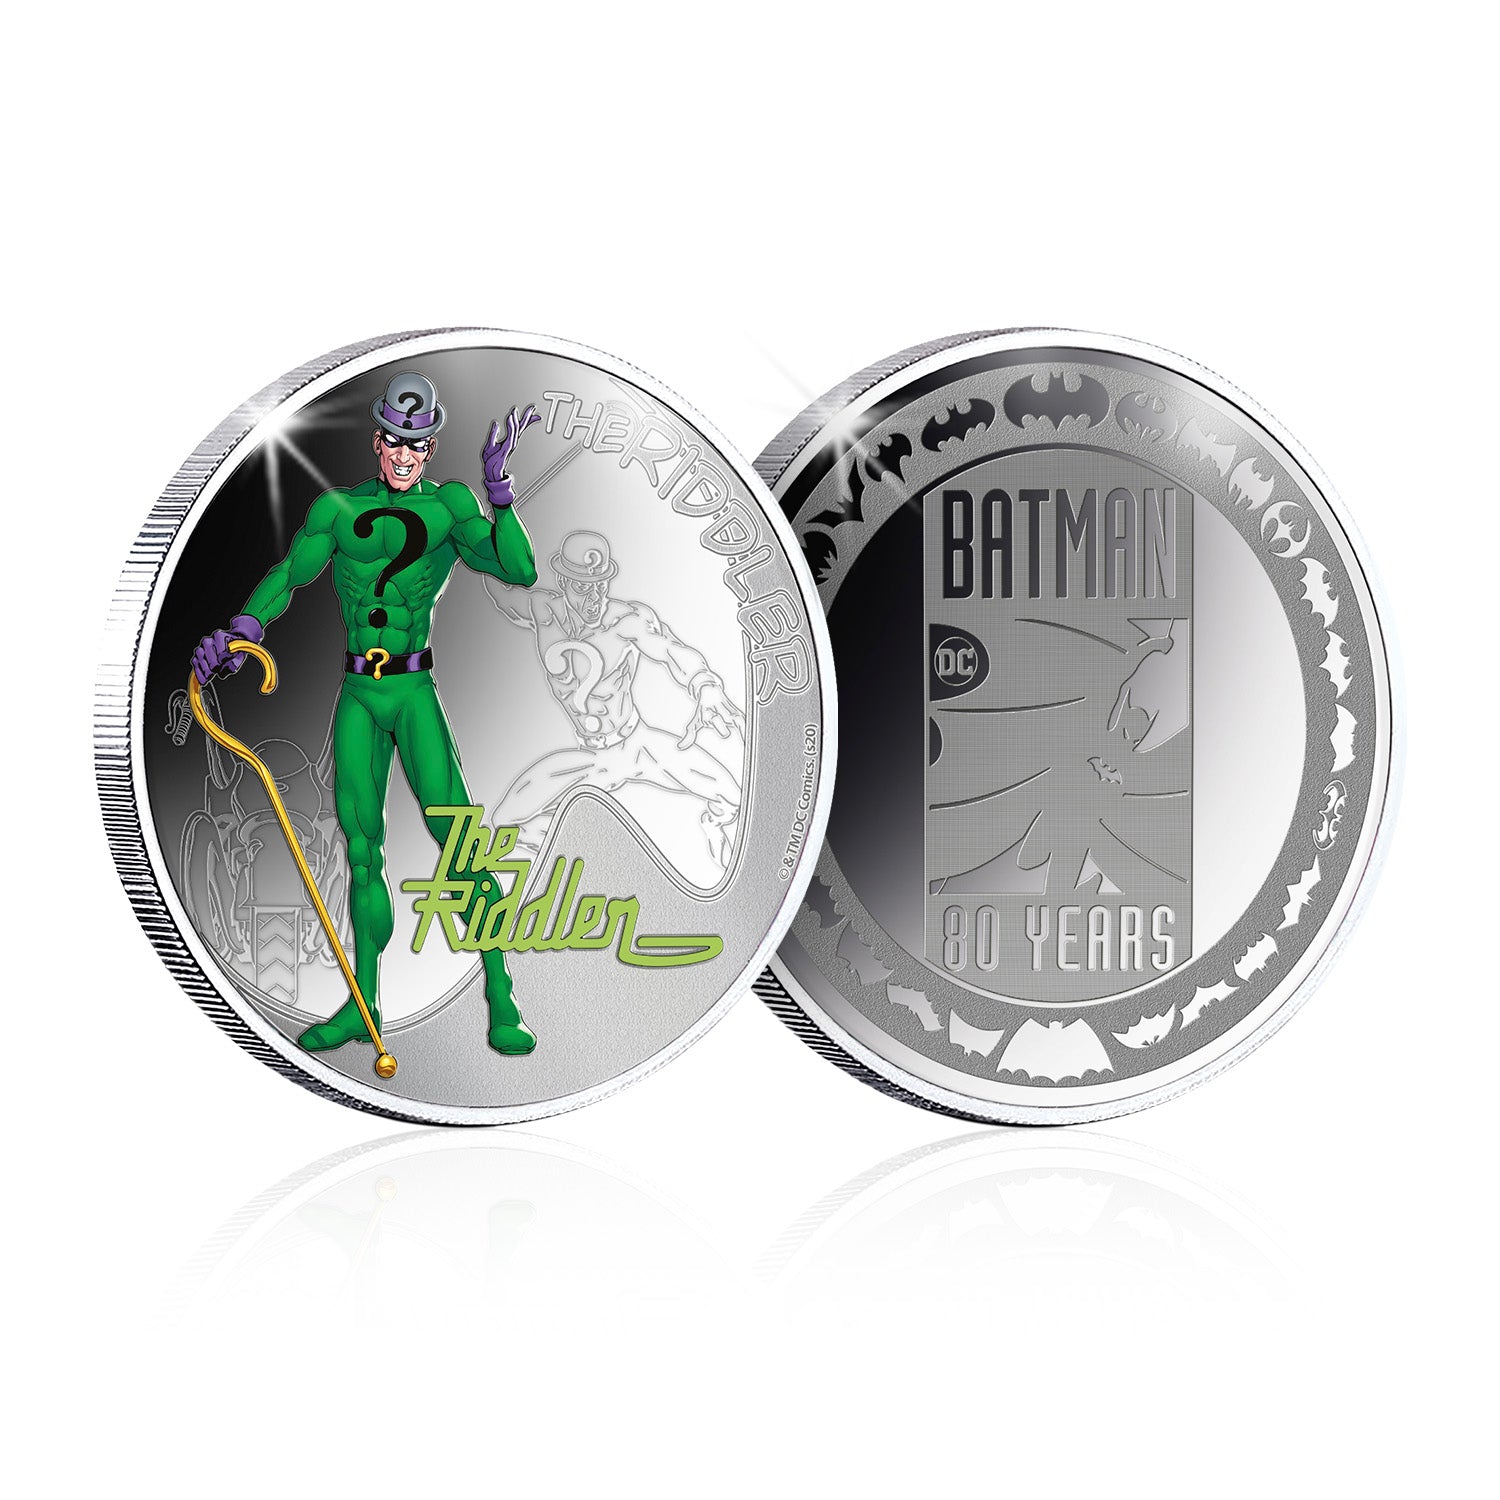 Riddler Silver-Plated Commemorative